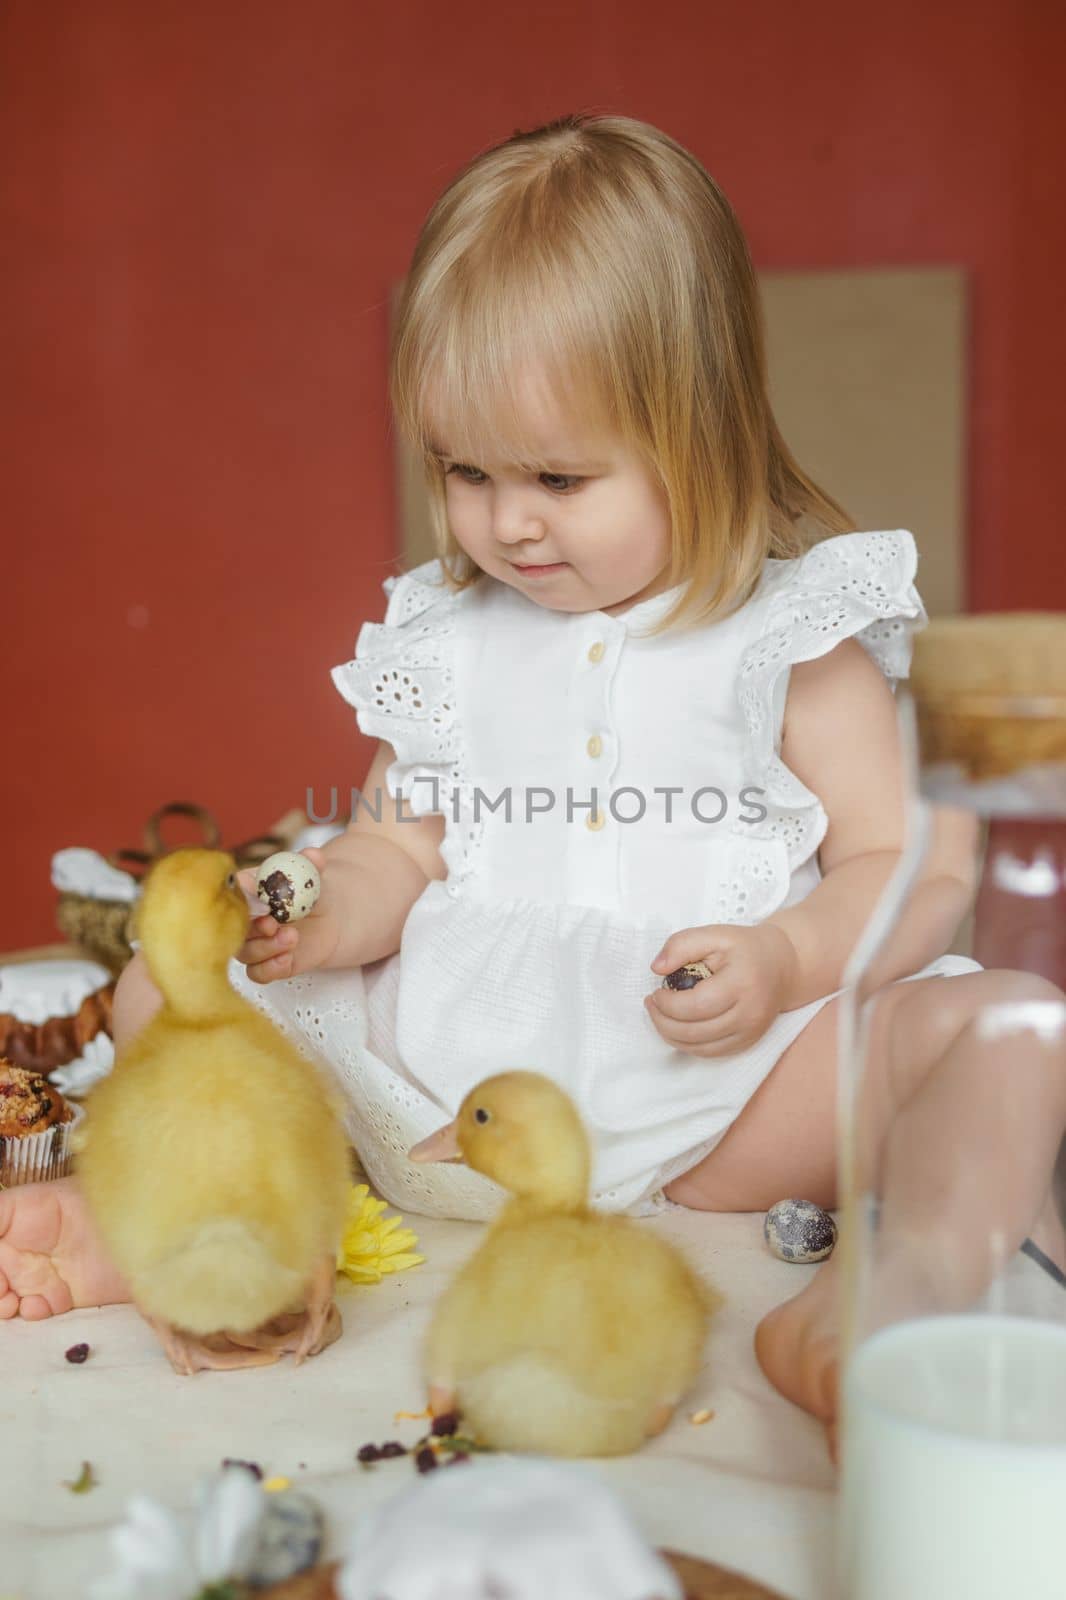 A little girl is sitting on the Easter table and playing with cute fluffy ducklings. The concept of celebrating happy Easter